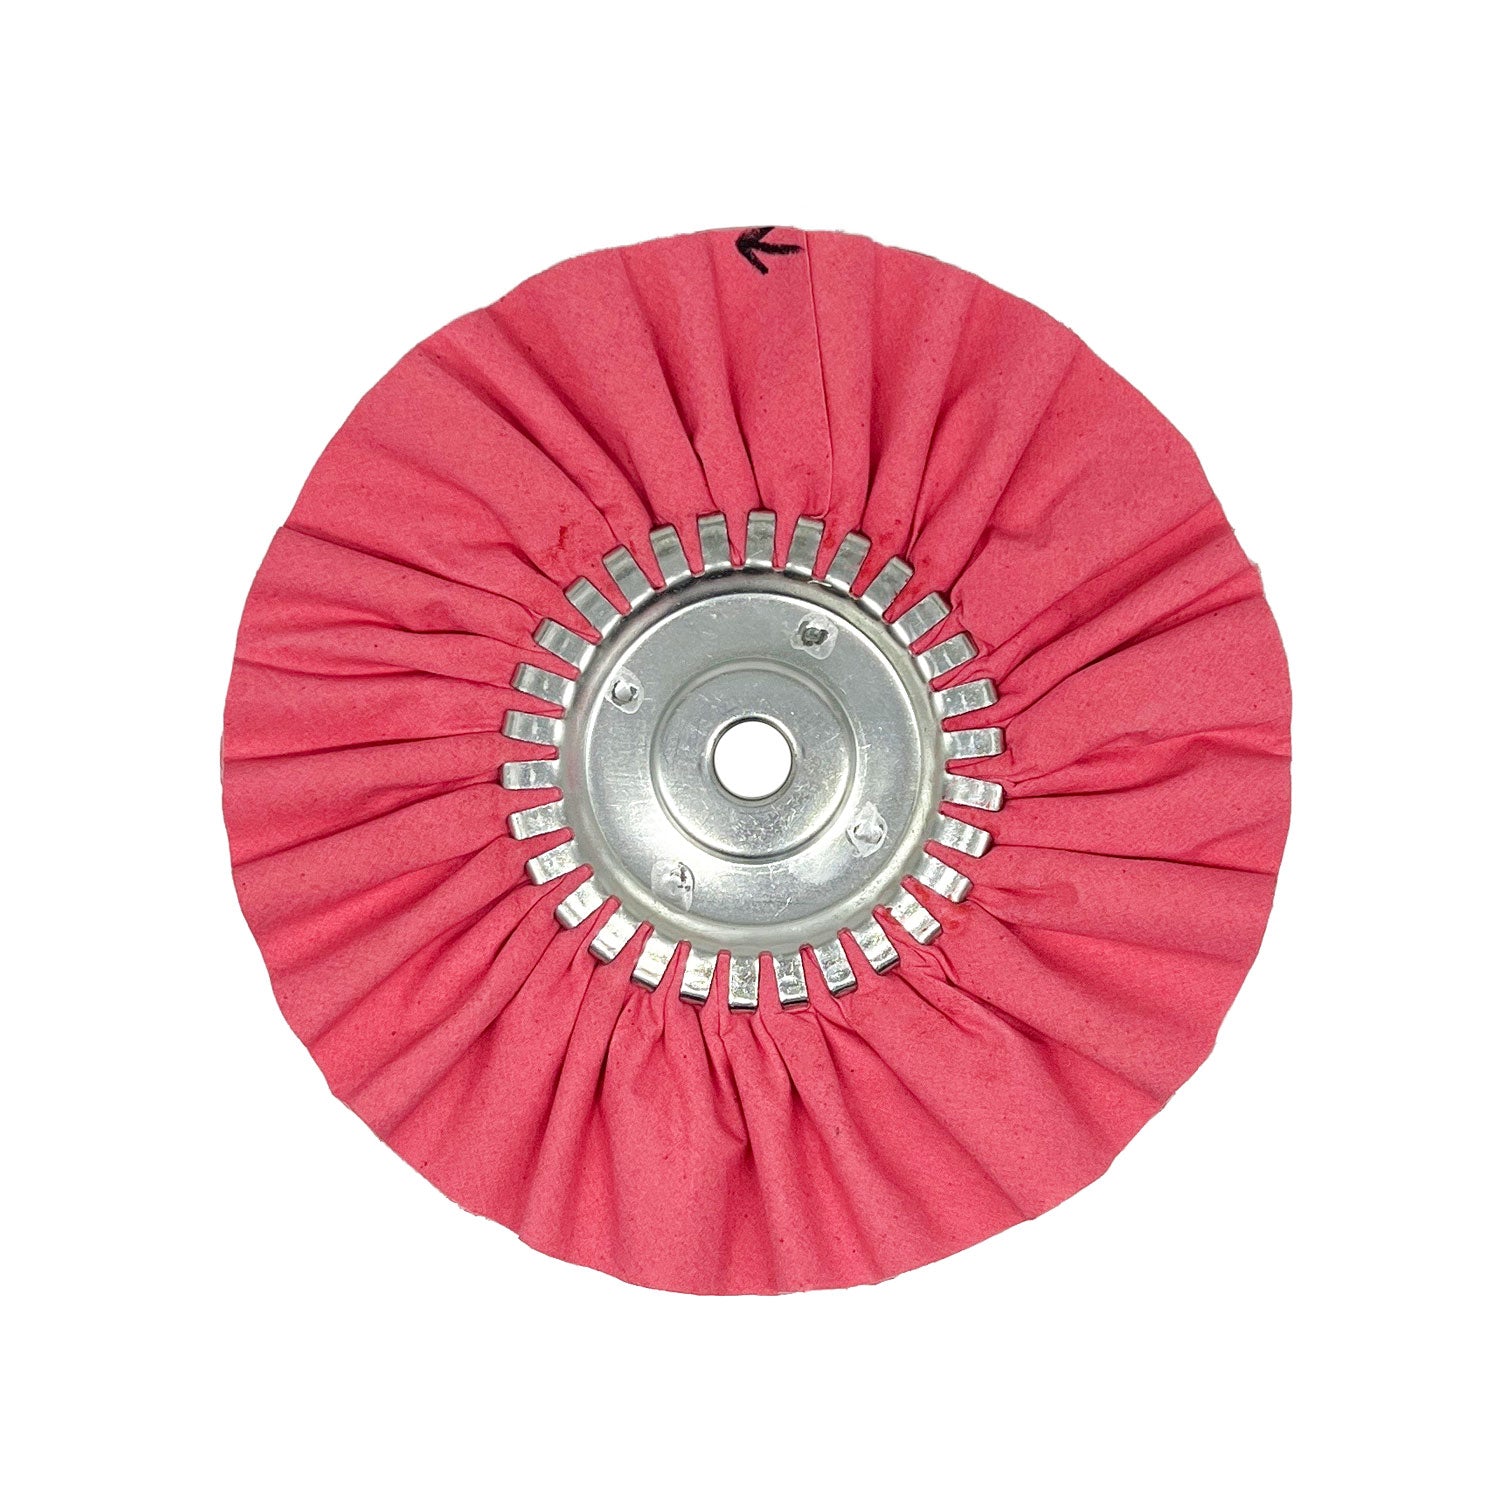 Renegade Products USA pink airway buffing wheel with center plate, designed for precise and efficient polishing and buffing applications